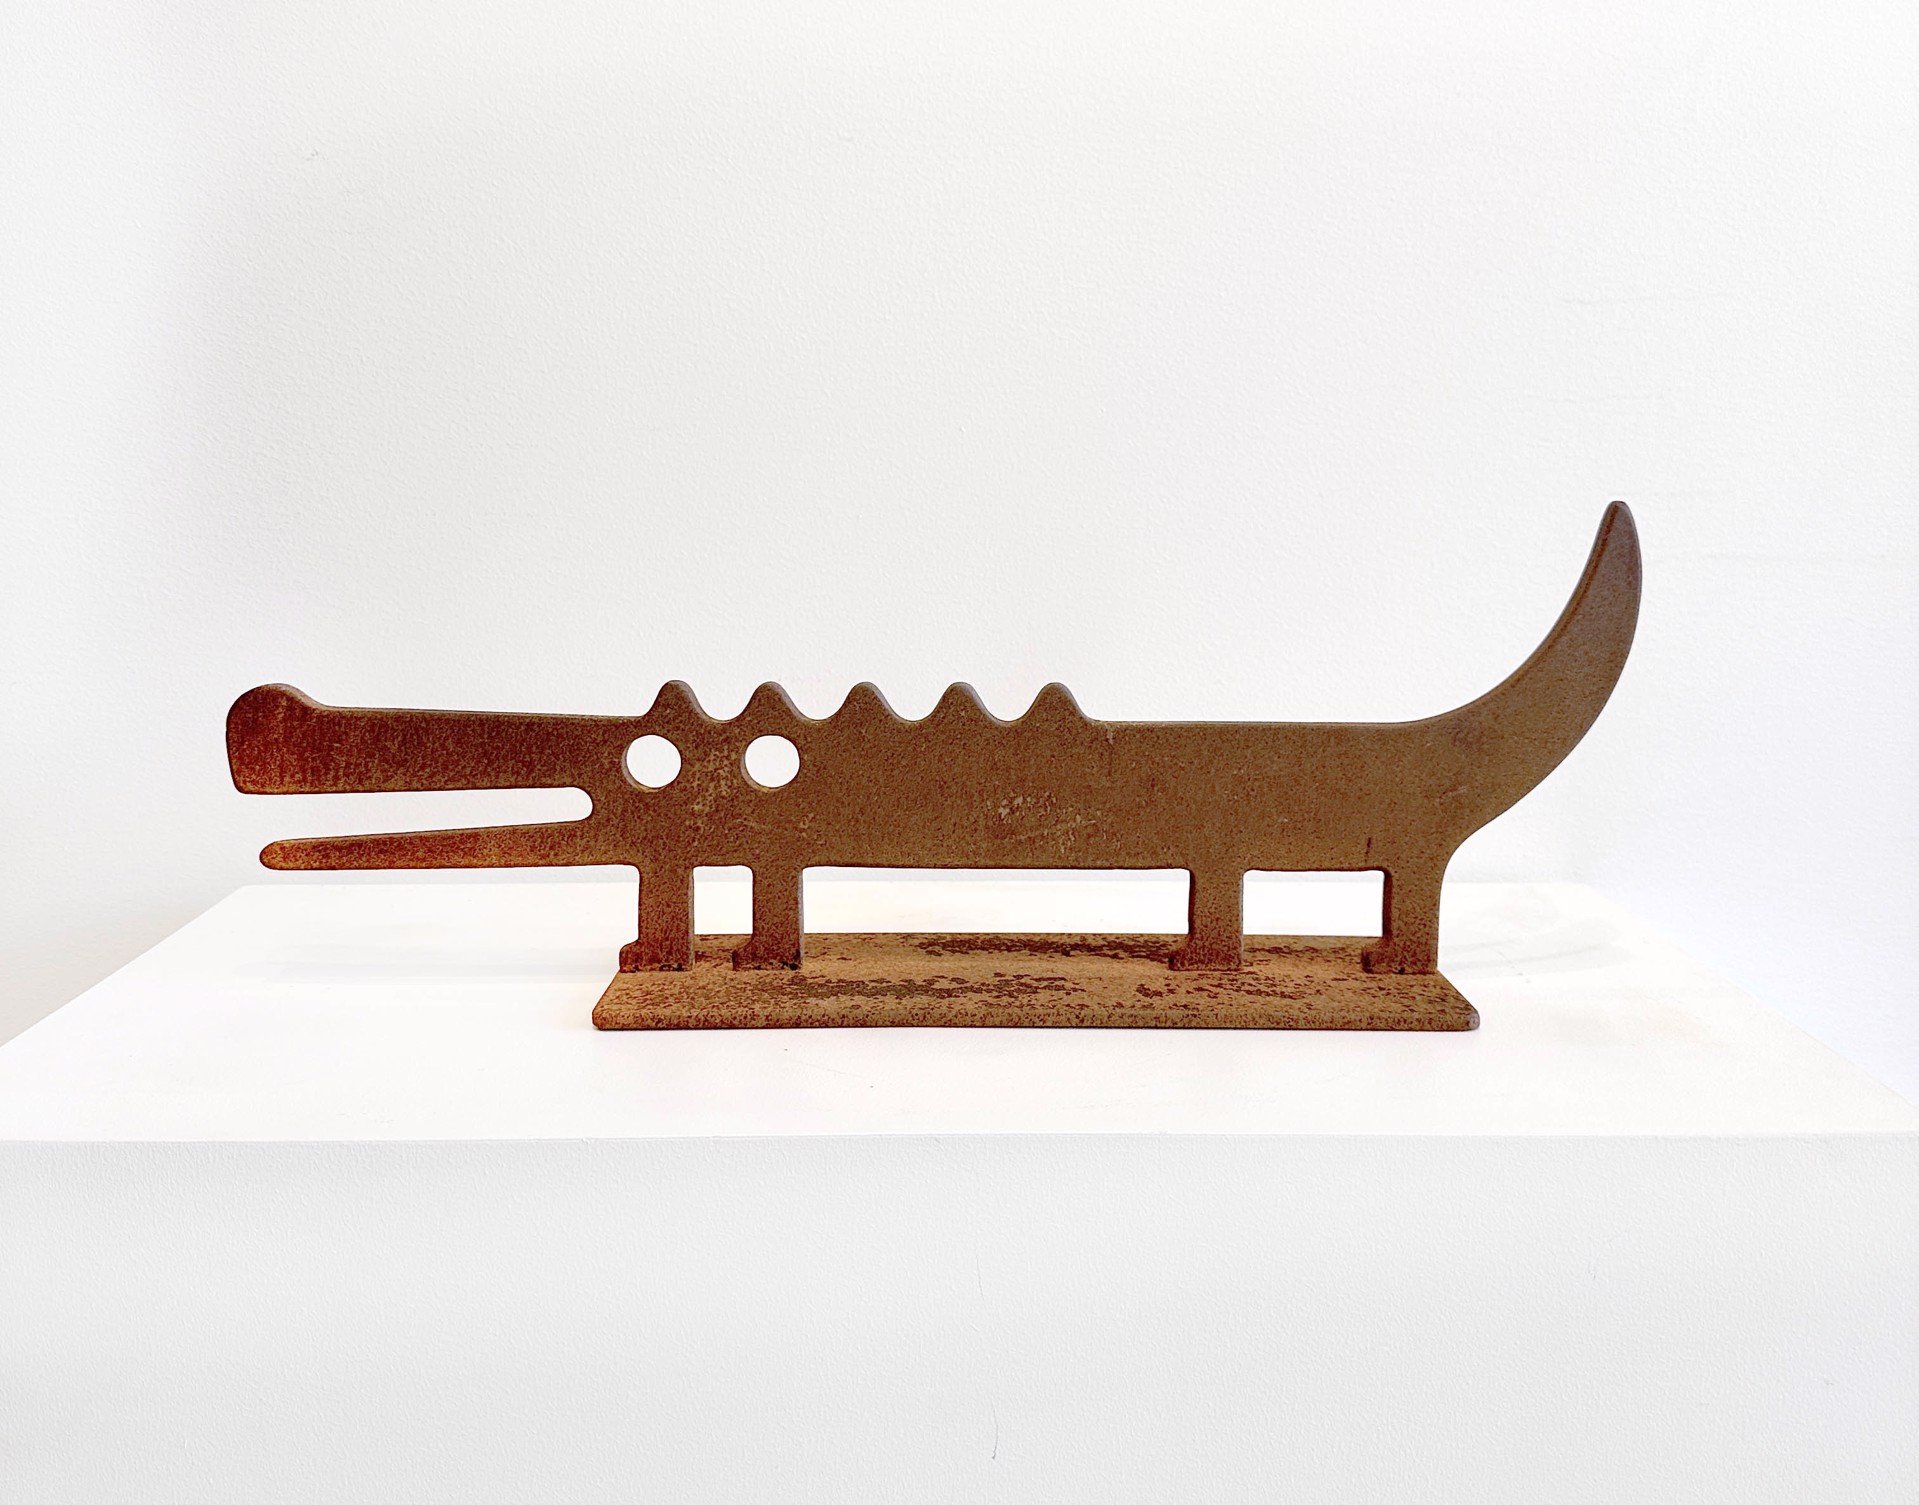 Steel Sculpture By Jeffie Brewer Featuring A Profile Alligator In Rusty Finish